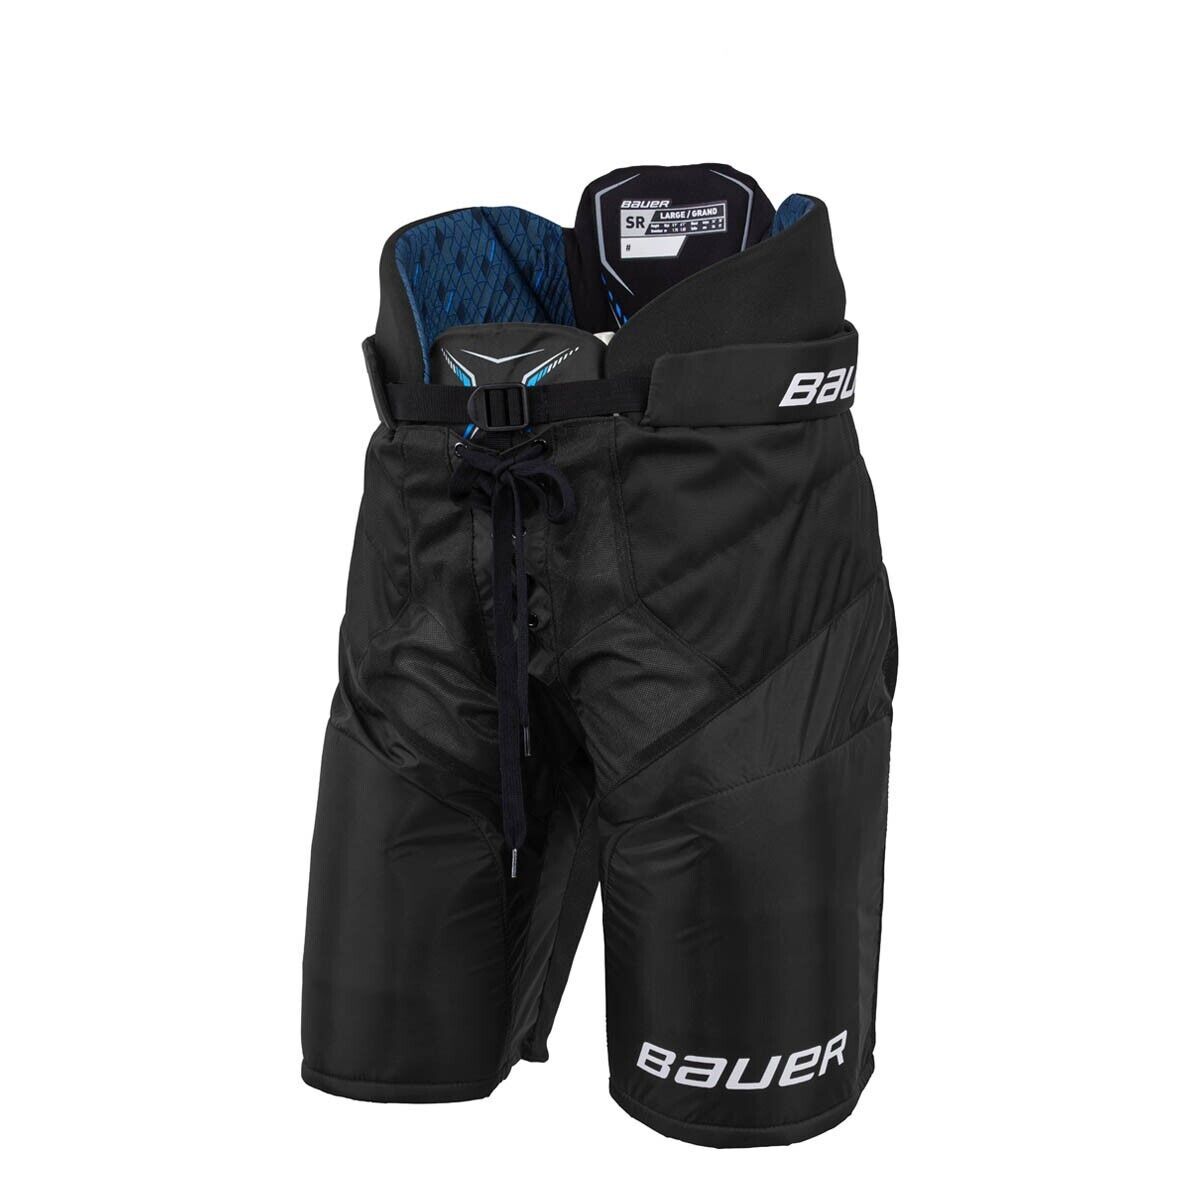 Bauer X Youth Hockey Pants - $39.99